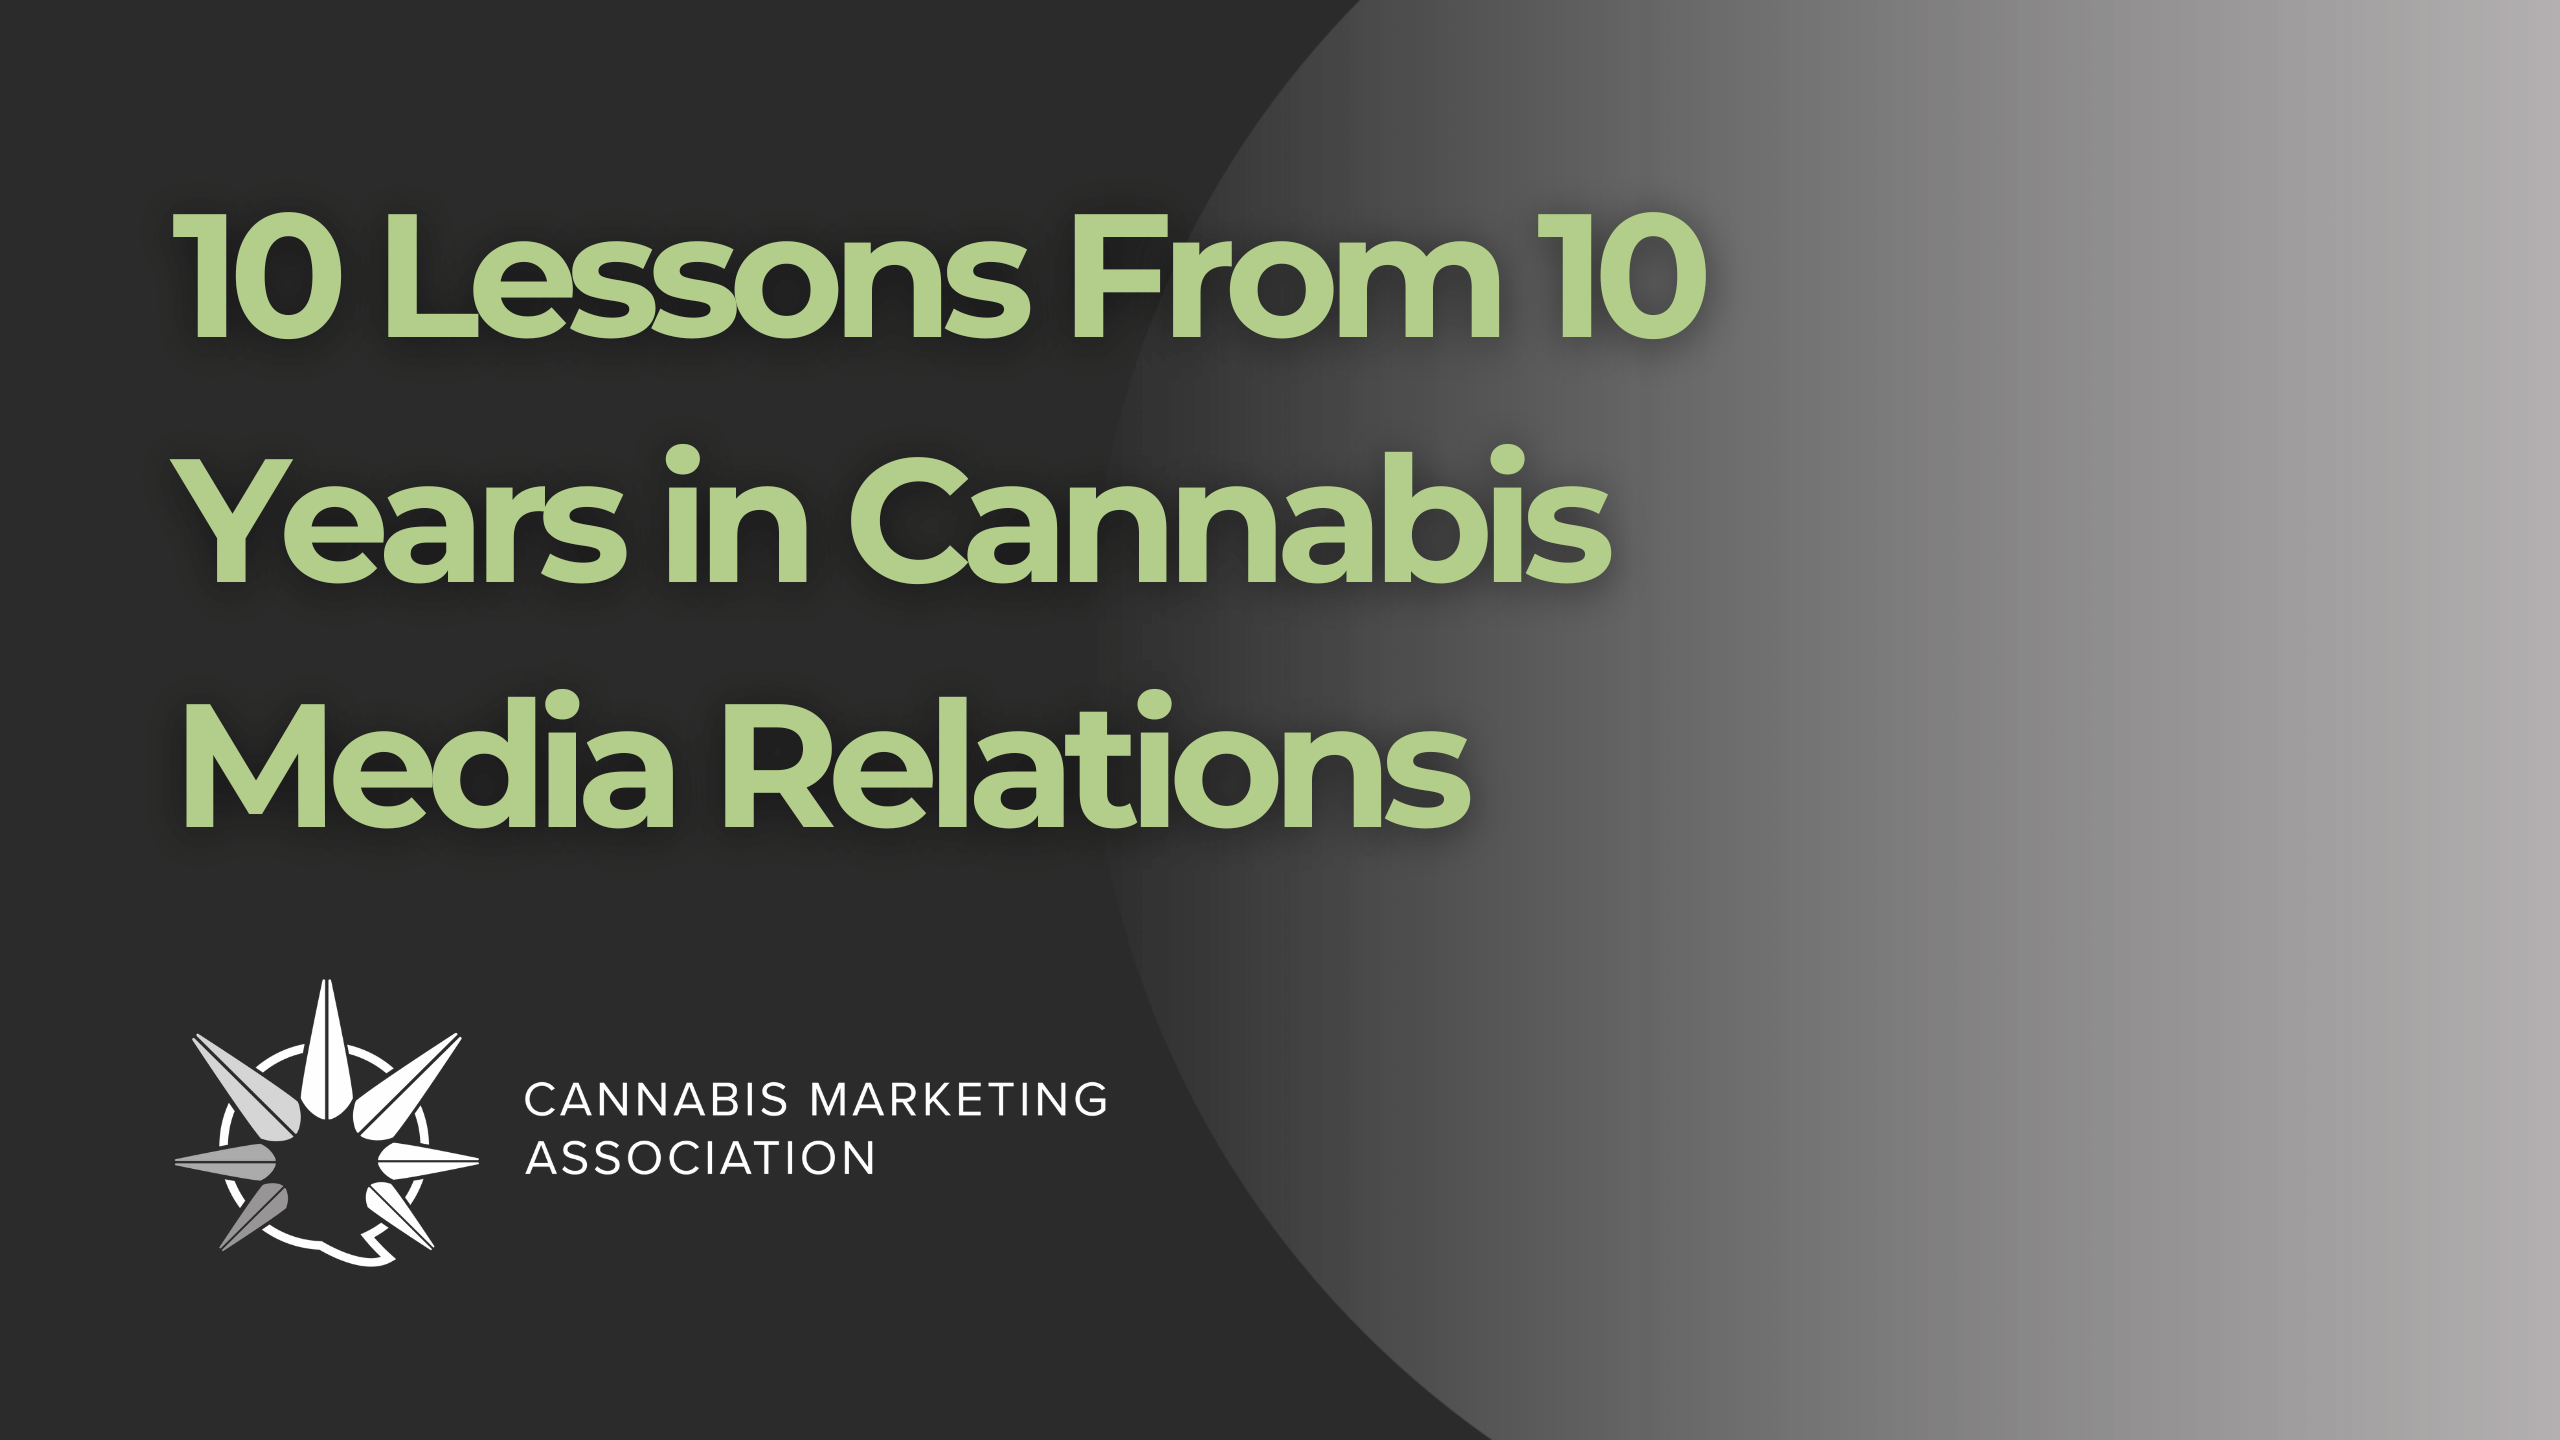 10 Lessons From 10 Years in Cannabis Media Relations